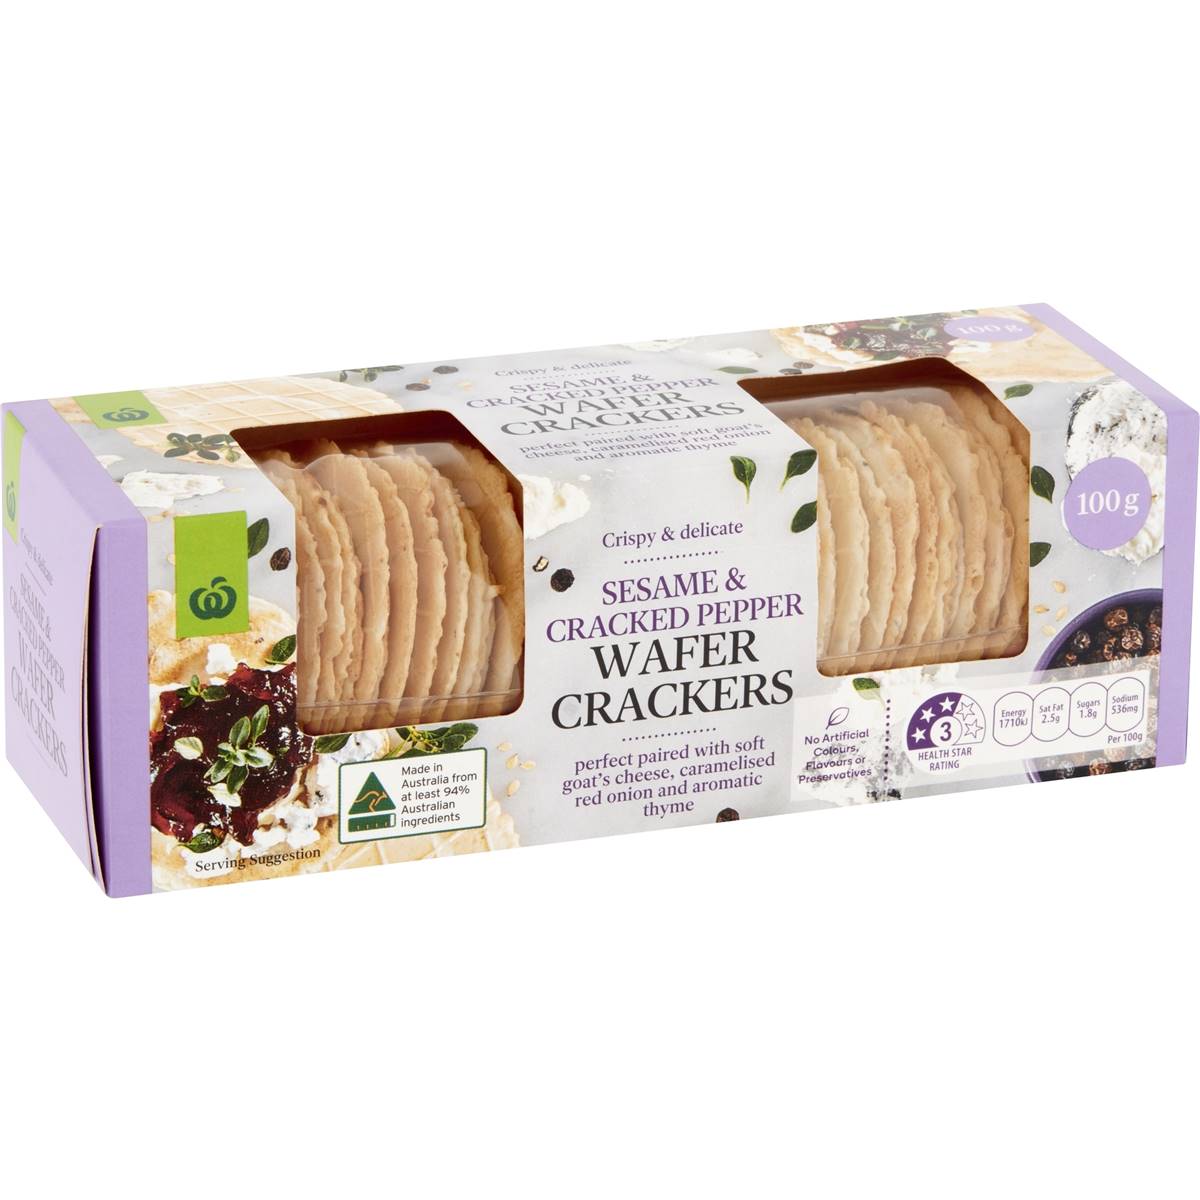 Calories in Woolworths Sesame & Cracked Pepper Wafer Crackers